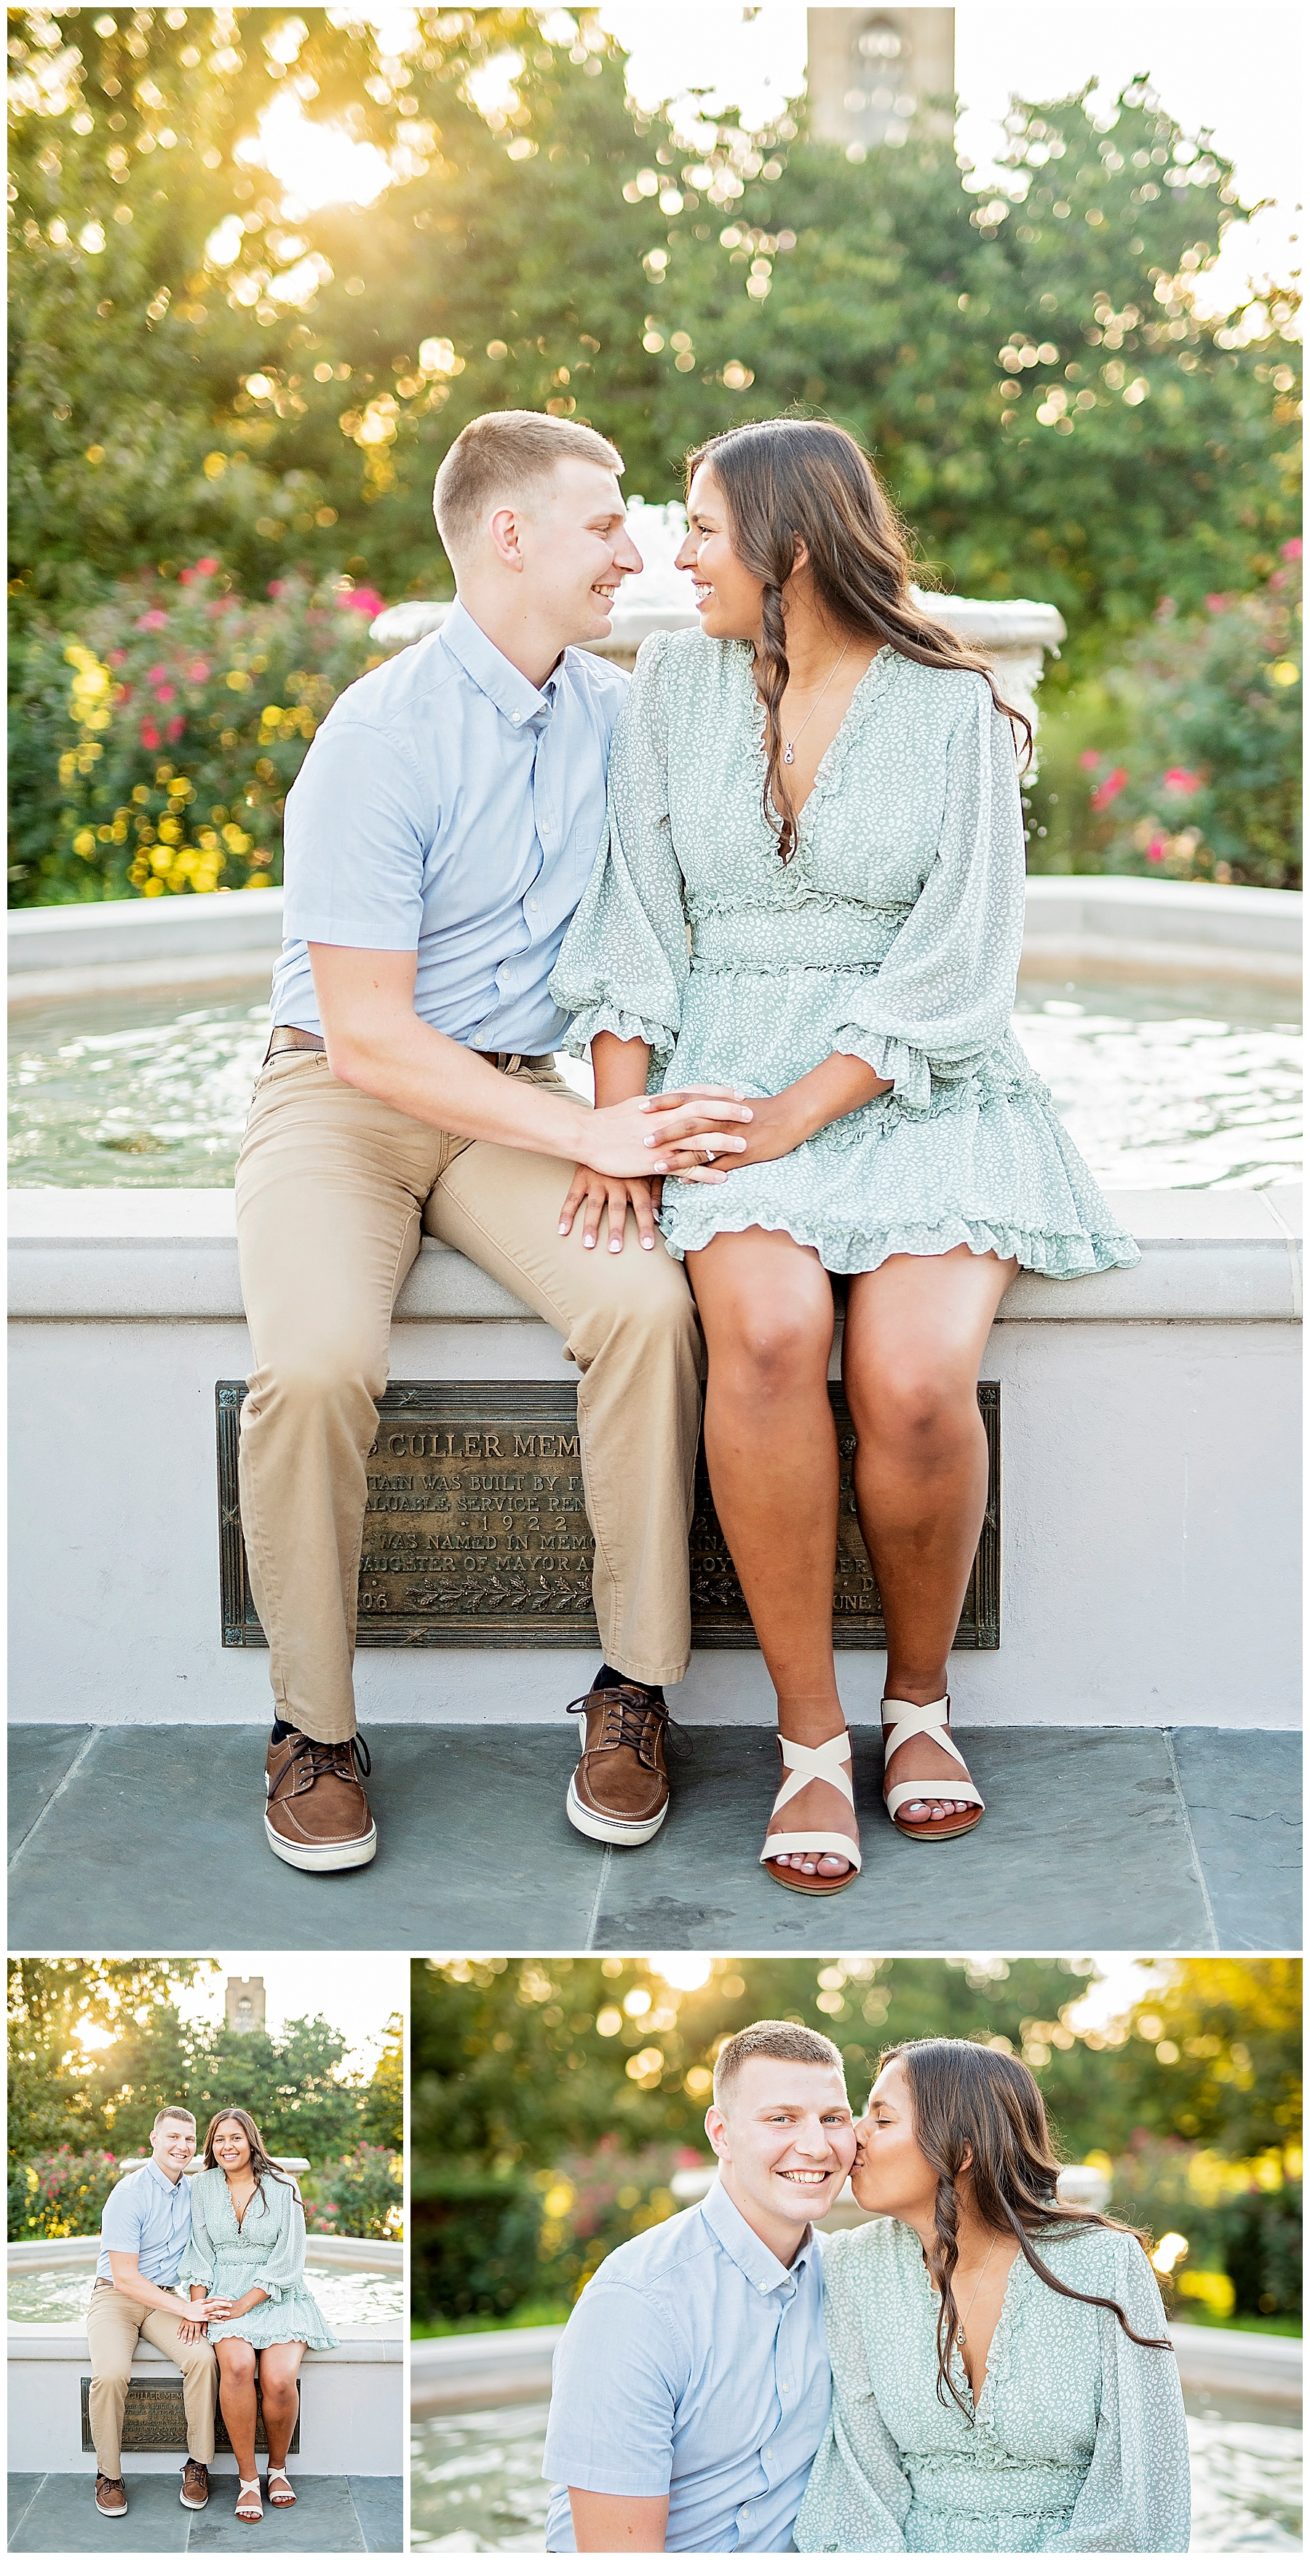 DOWNTOWN FREDERICK MD ENGAGEMENT SESSION